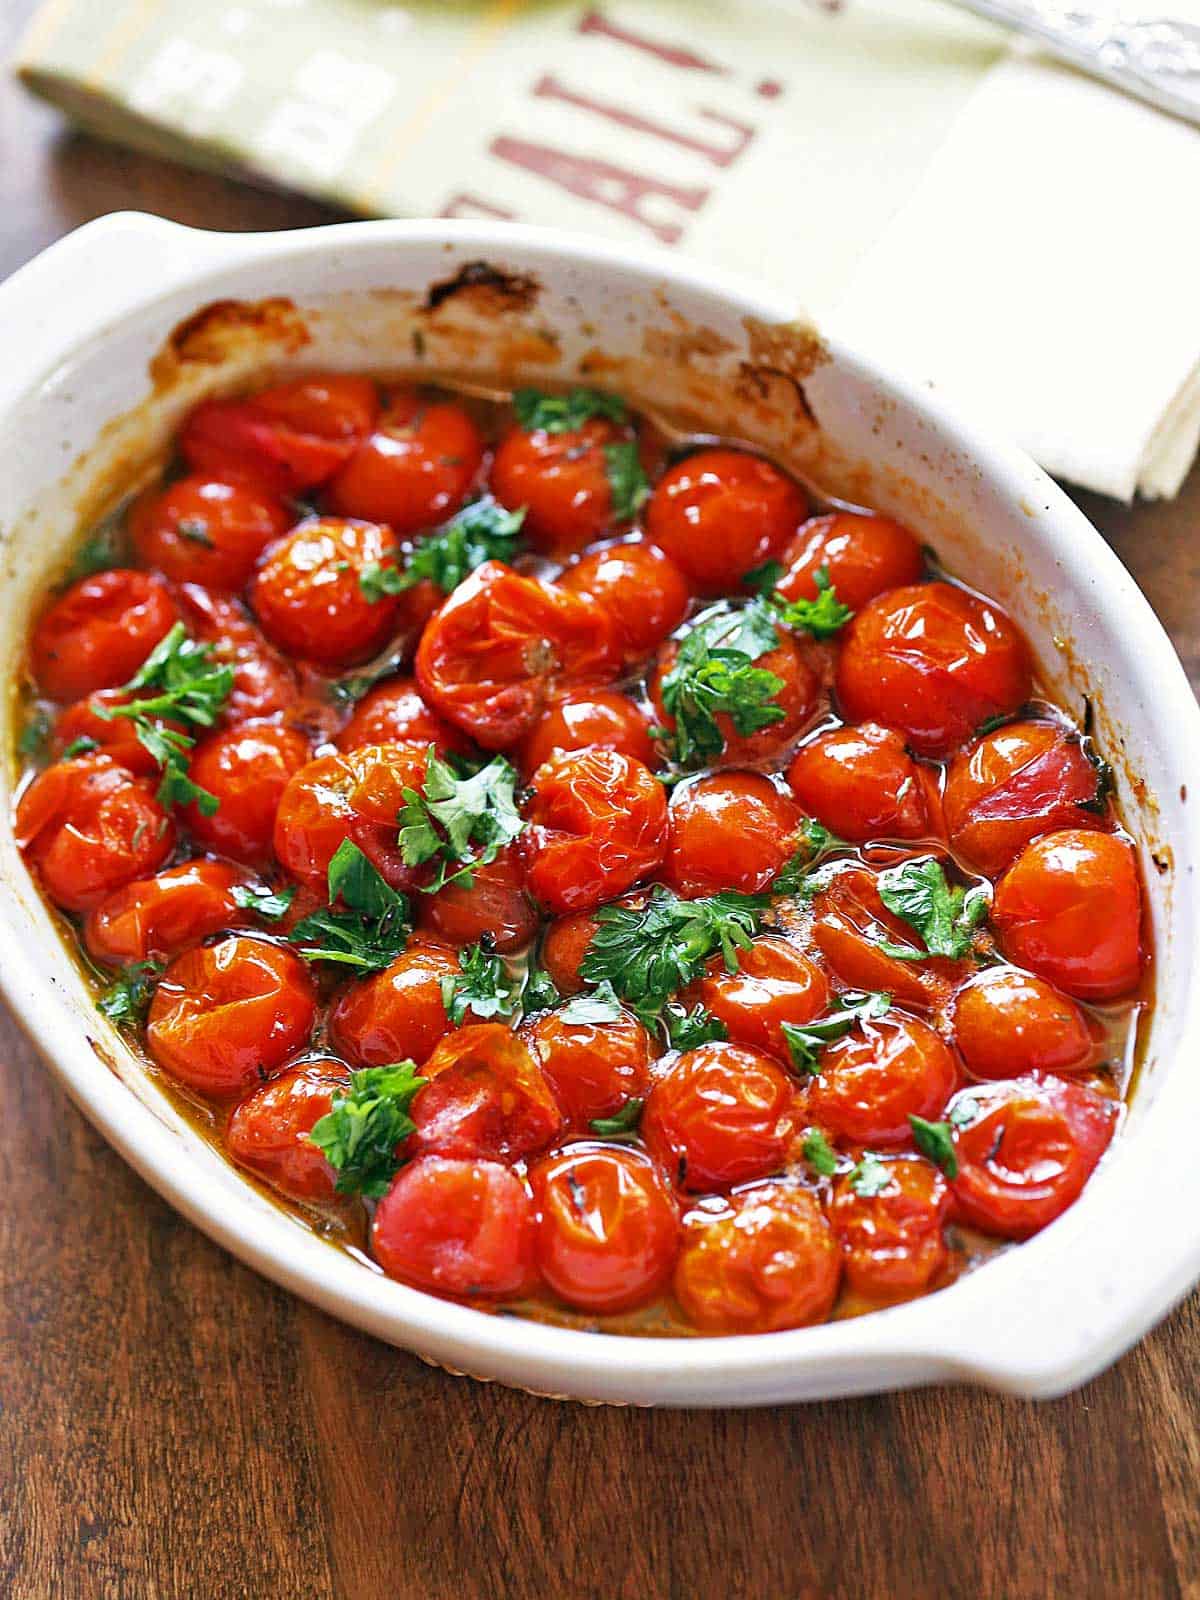 Roasted cherry tomatoes sprinkled with parsley for garnish.